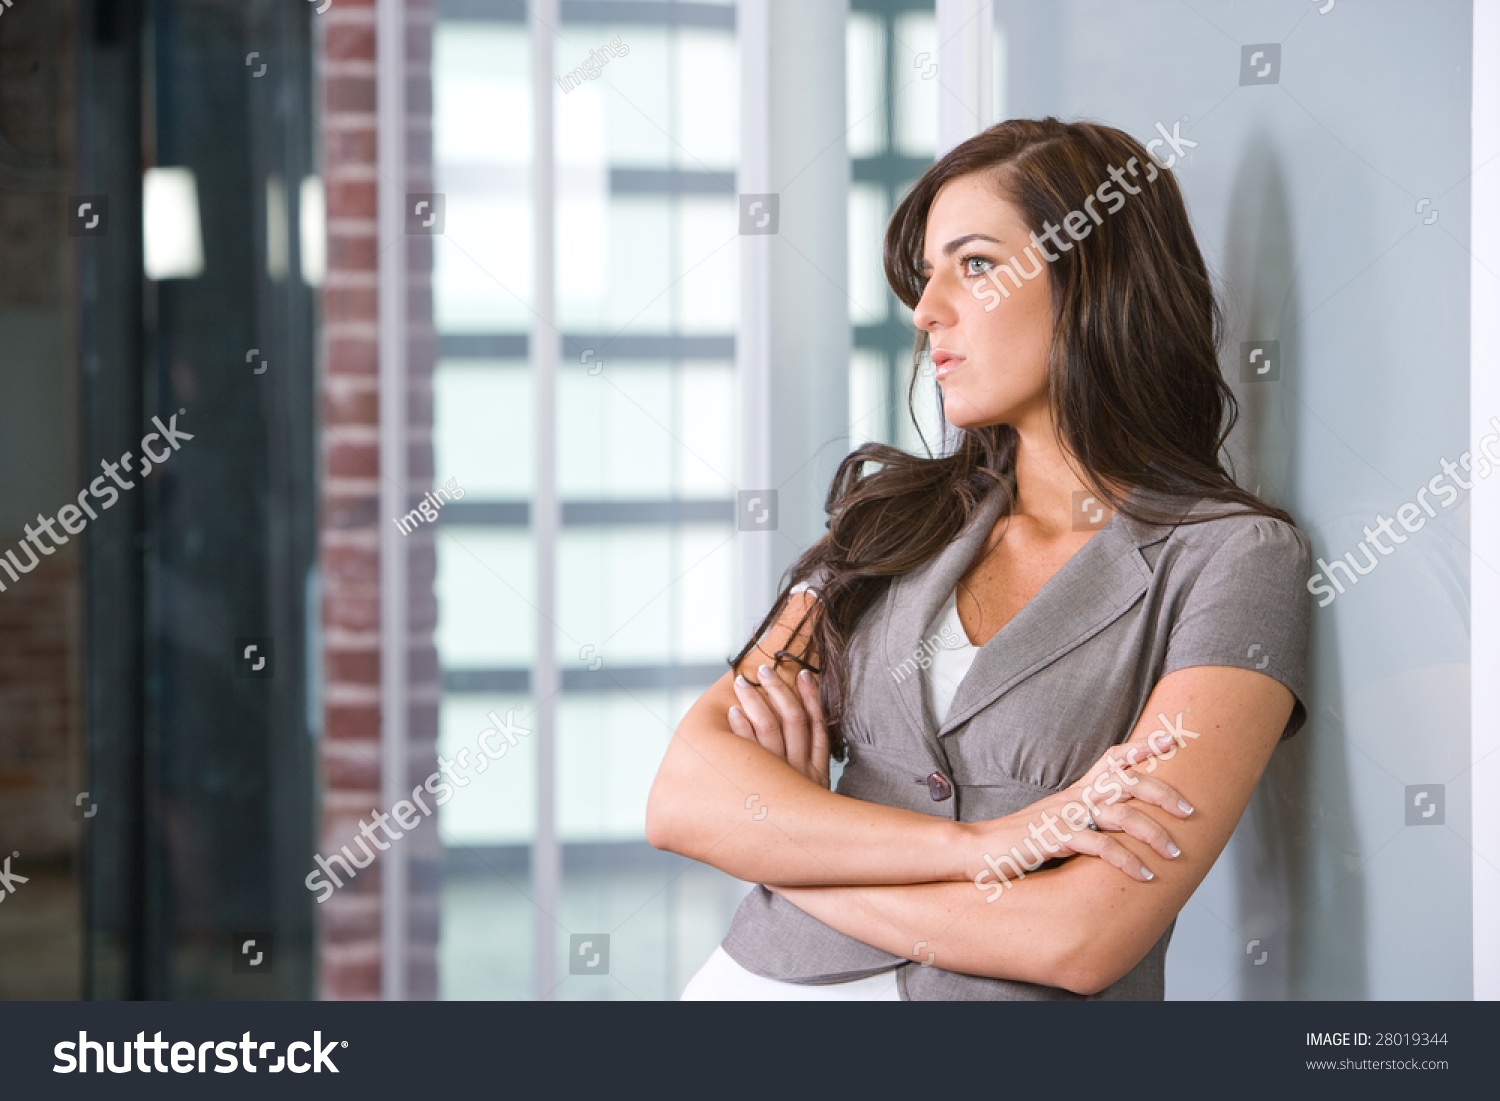 Business woman arms crossed in a modern office #28019344